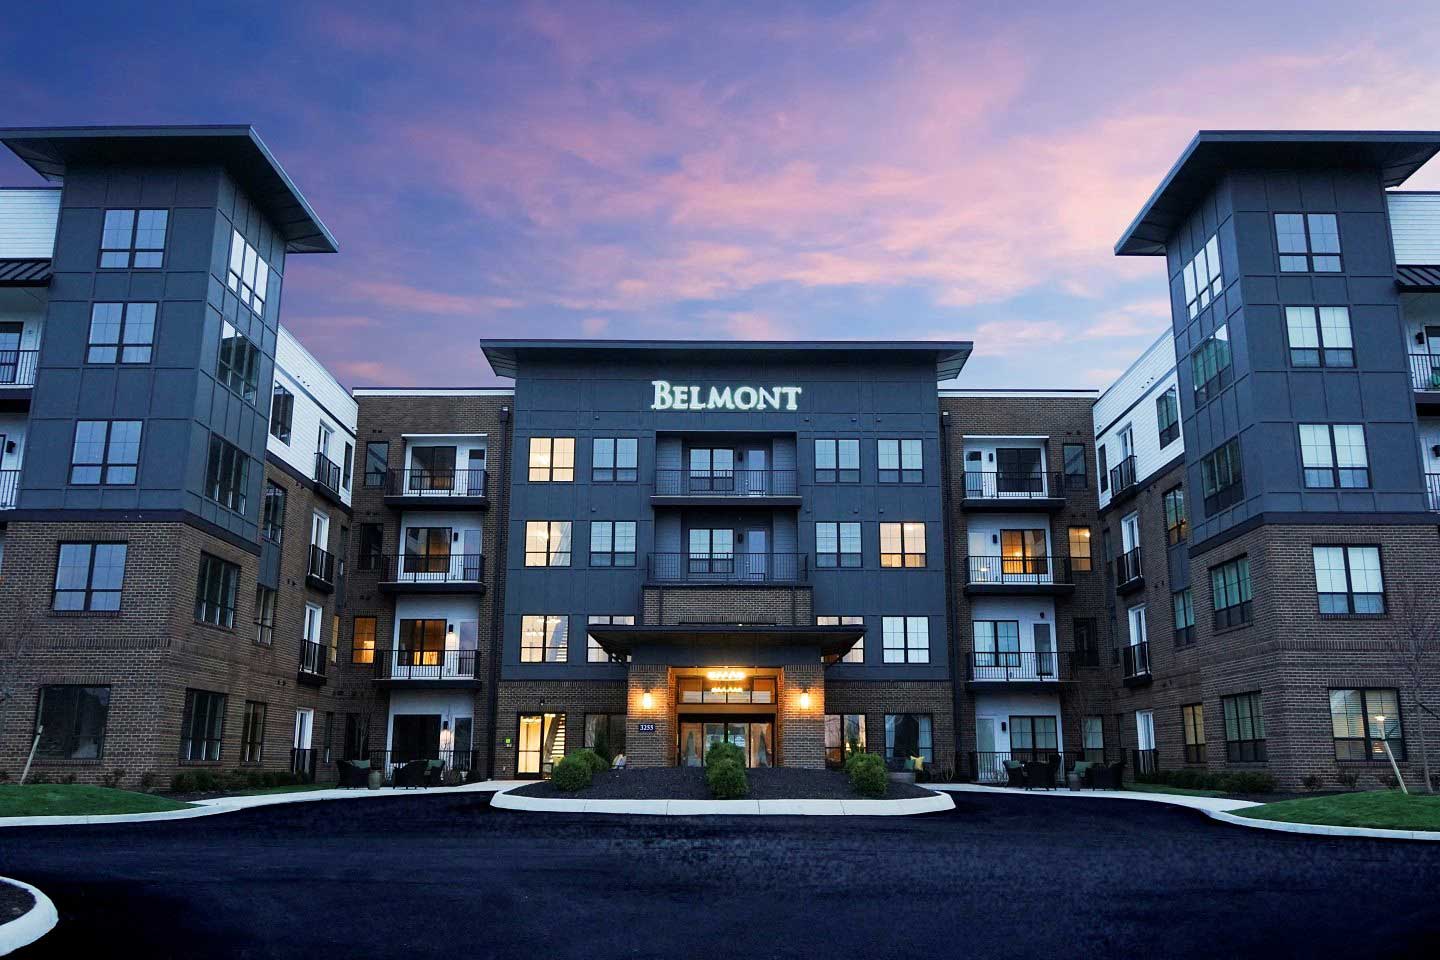 Apartment to Lease at Belmont House Apartments in Columbus, Ohio